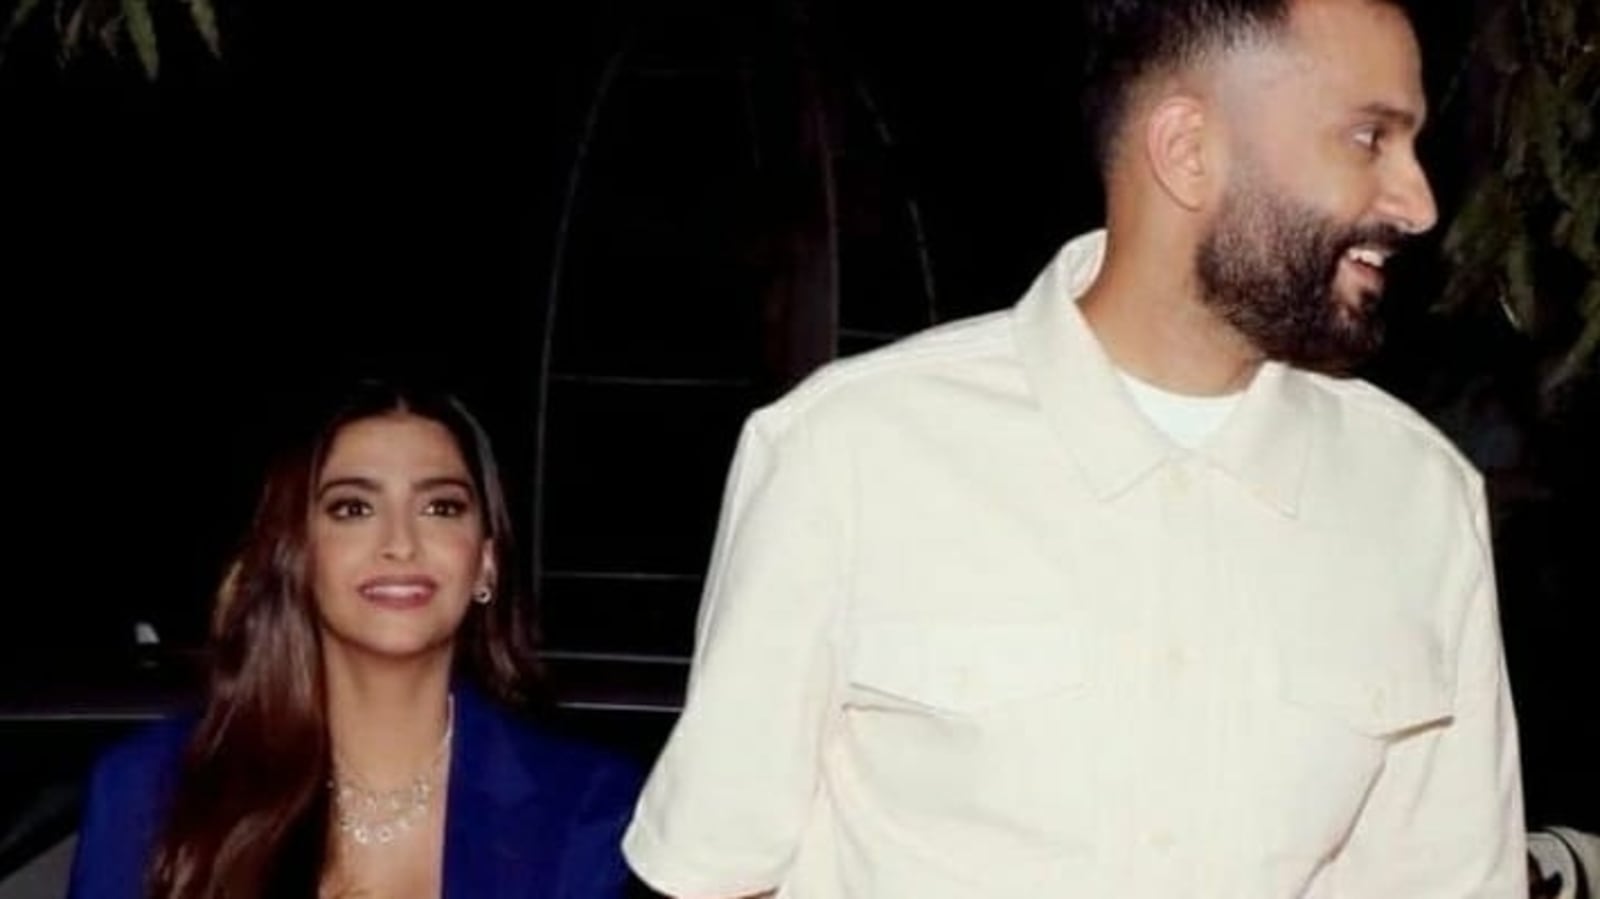 Pregnant Sonam Kapoor advised by social media user to wear mask, husband Anand Ahuja defends her